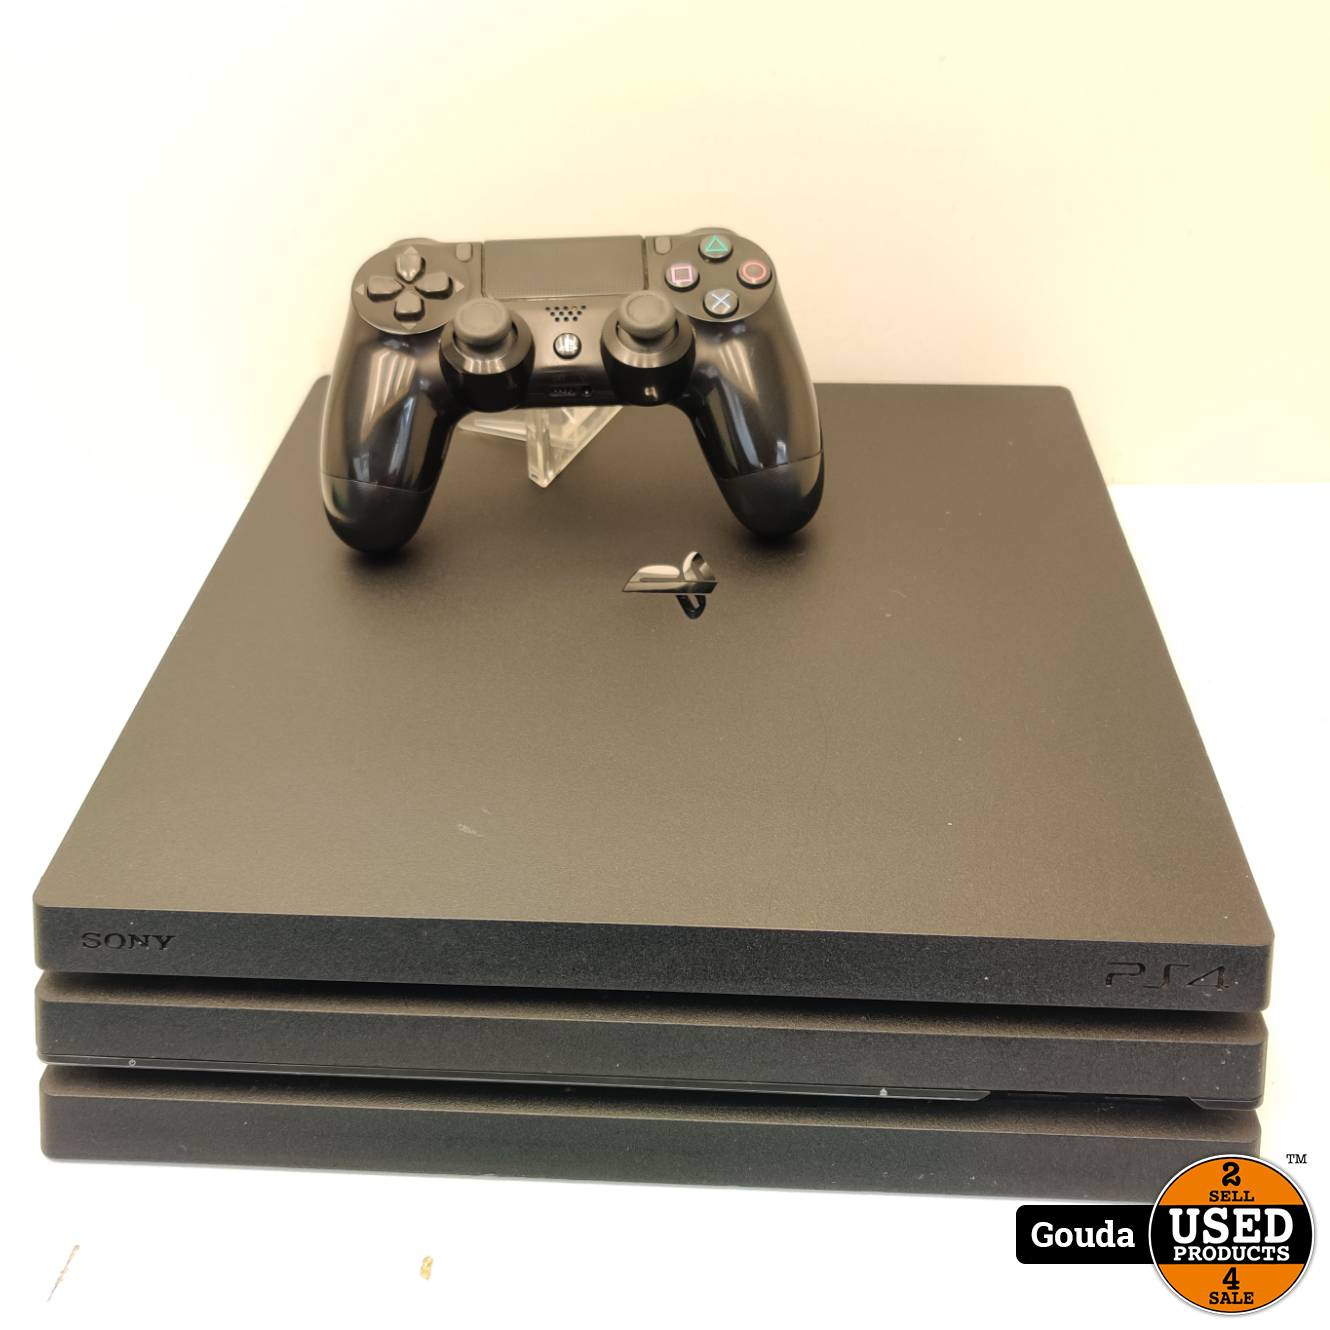 Hick boycot Knuppel Playstation 4 pro 1TB incl controller - Used Products Gouda